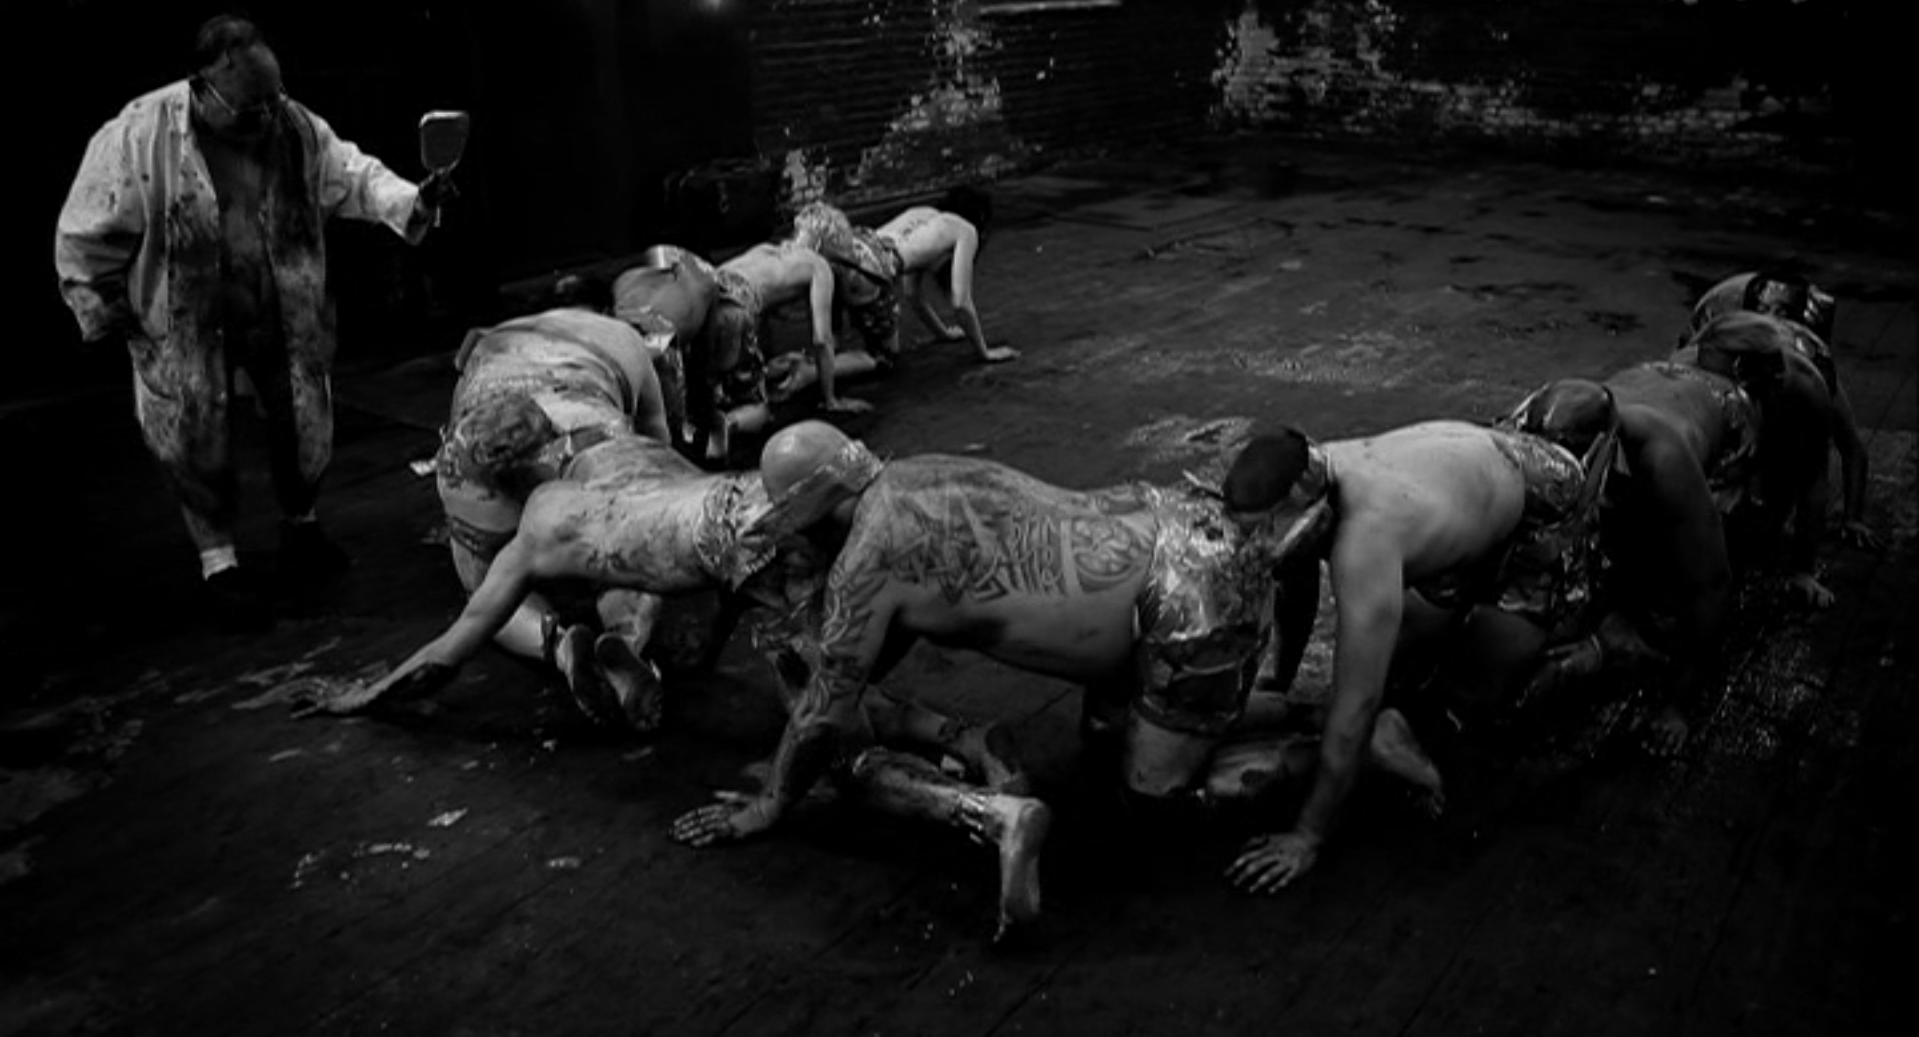 The Human Centipede II (Full Sequence) - Cult Projections